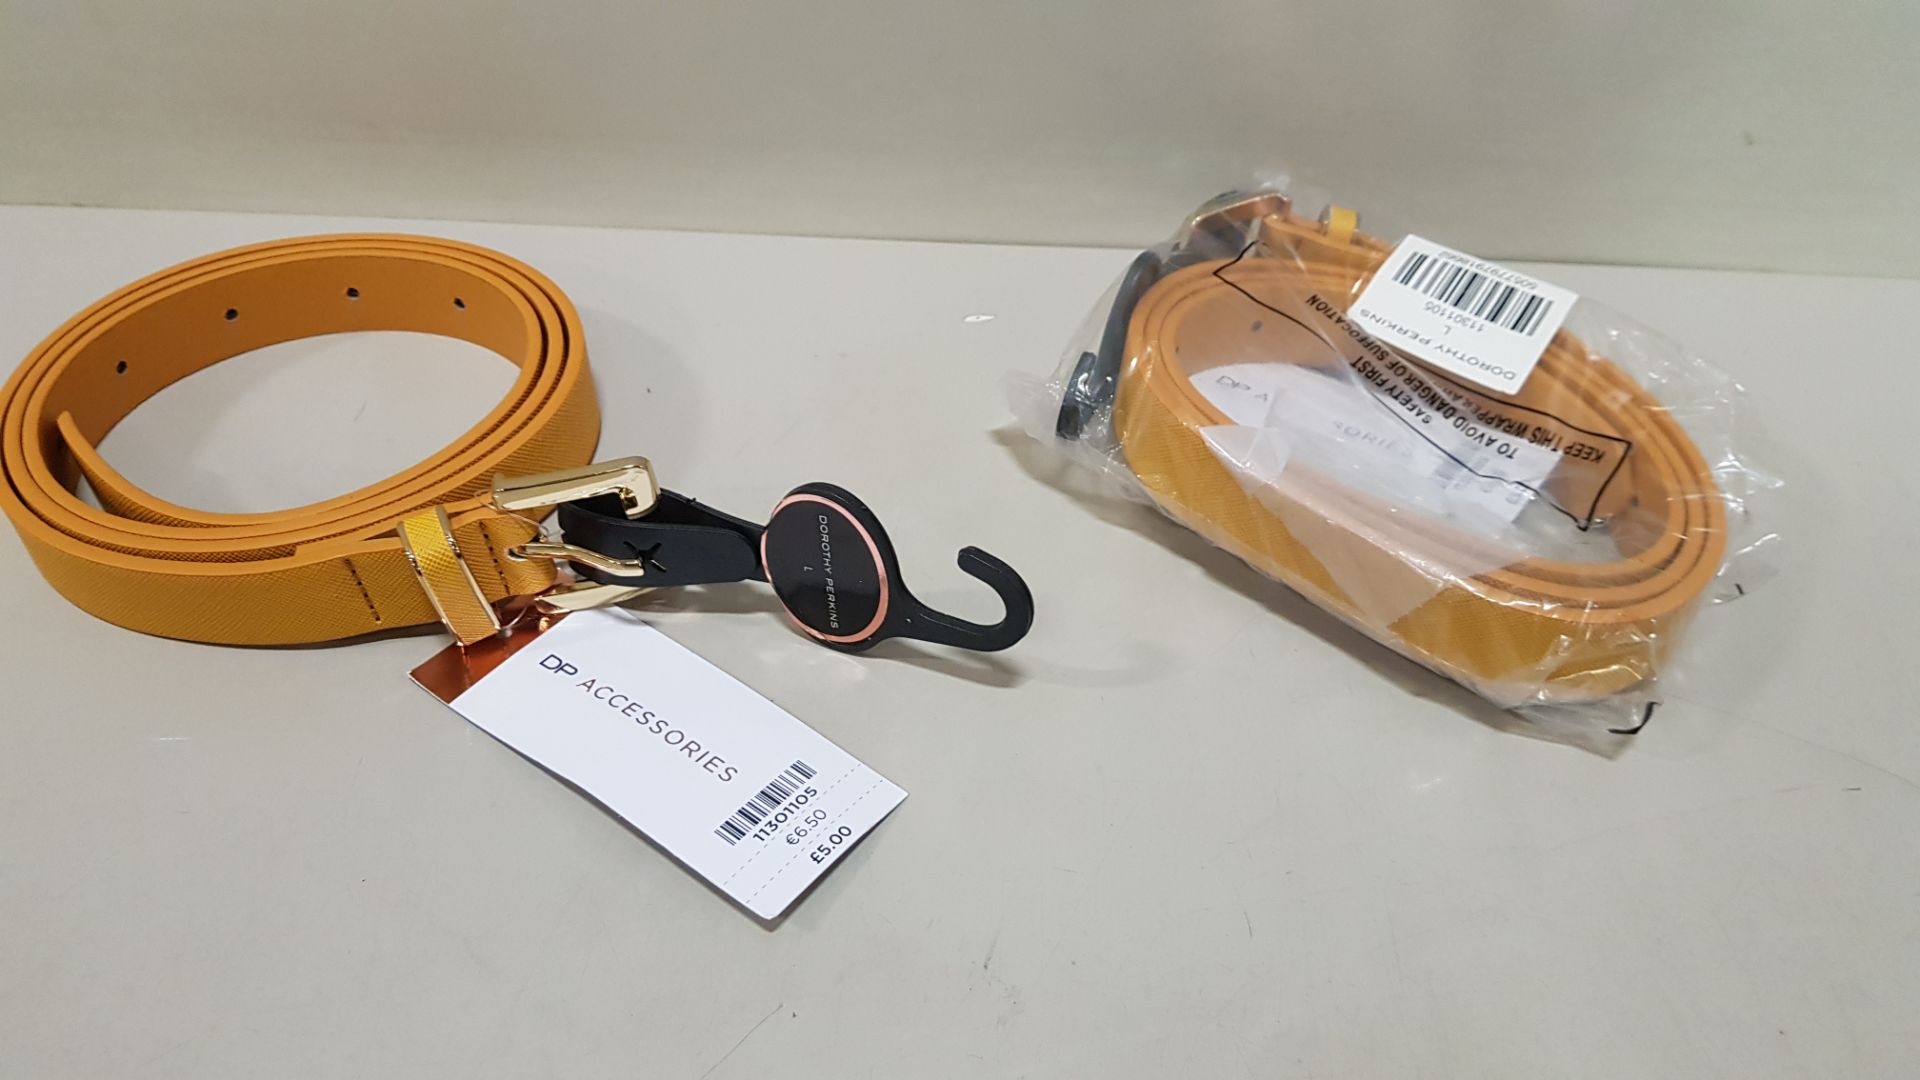 150 X BRAND NEW DOROTHY PERKINS MUSTARD BELTS SIZE LARGE RRP £5.00 (TOTAL RRP £750.00)